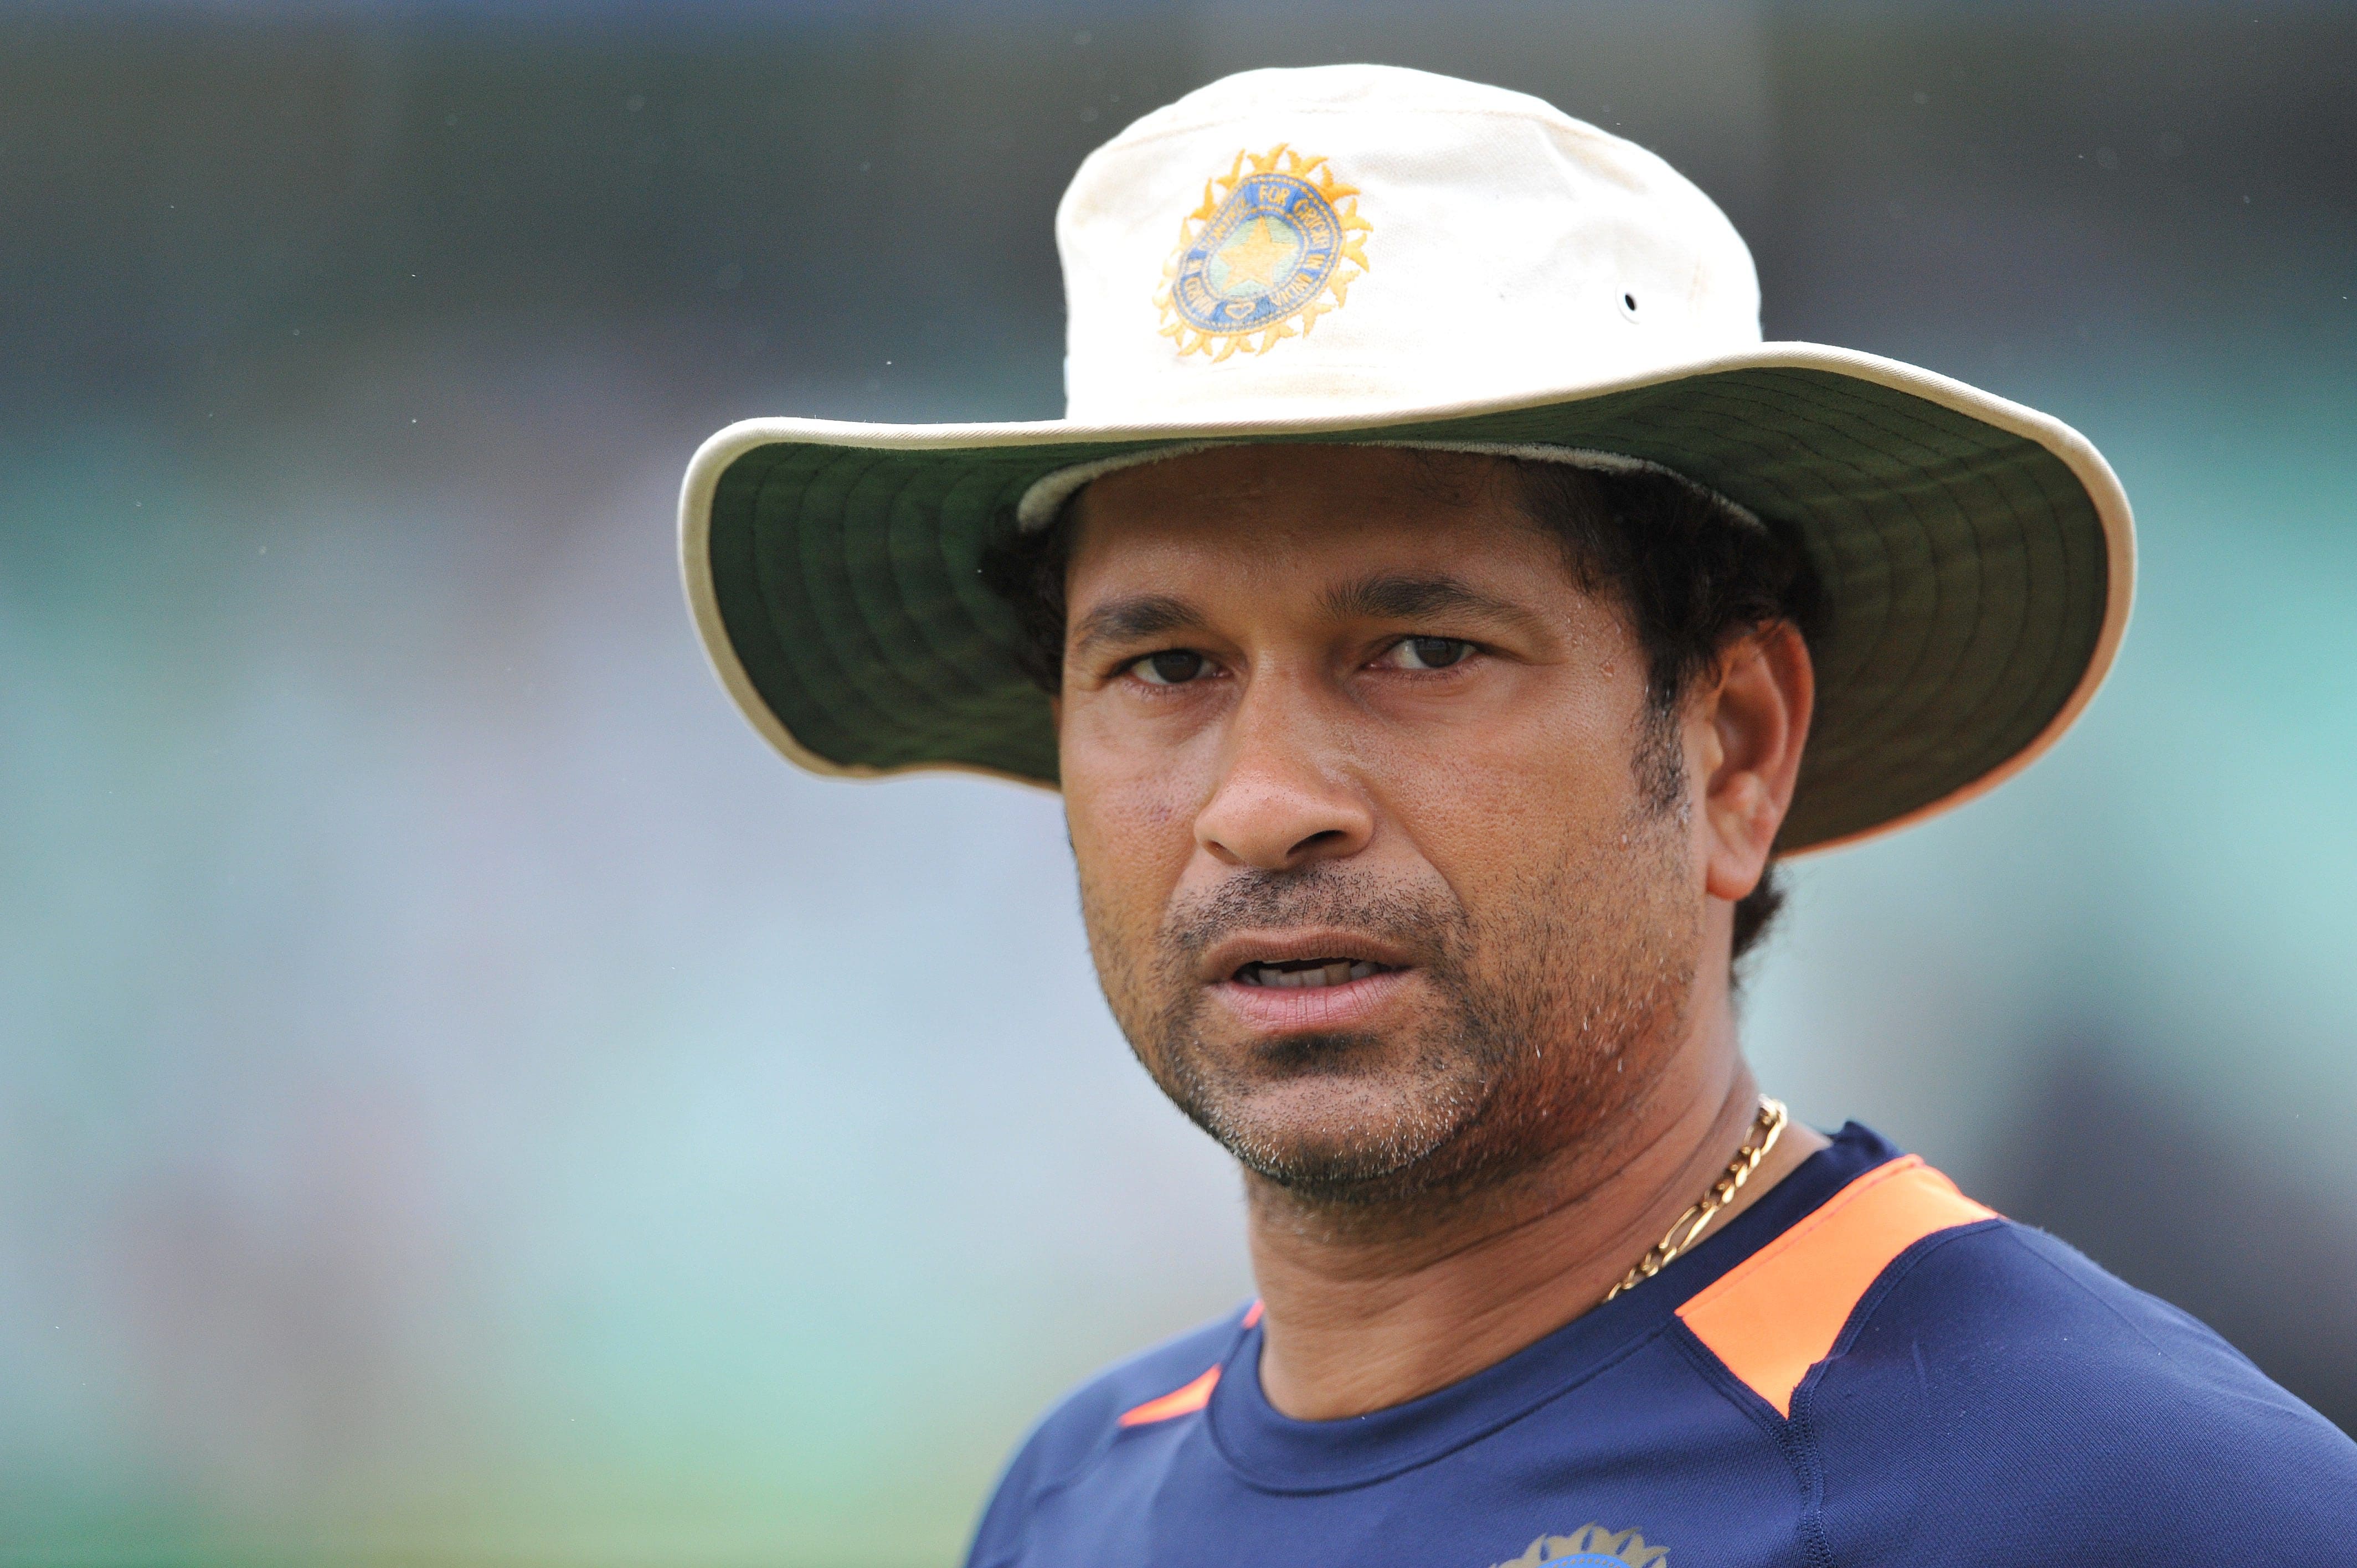 VIDEO: Sachin Tendulkar receives standing ovation when he comes out to bat during MCC ...